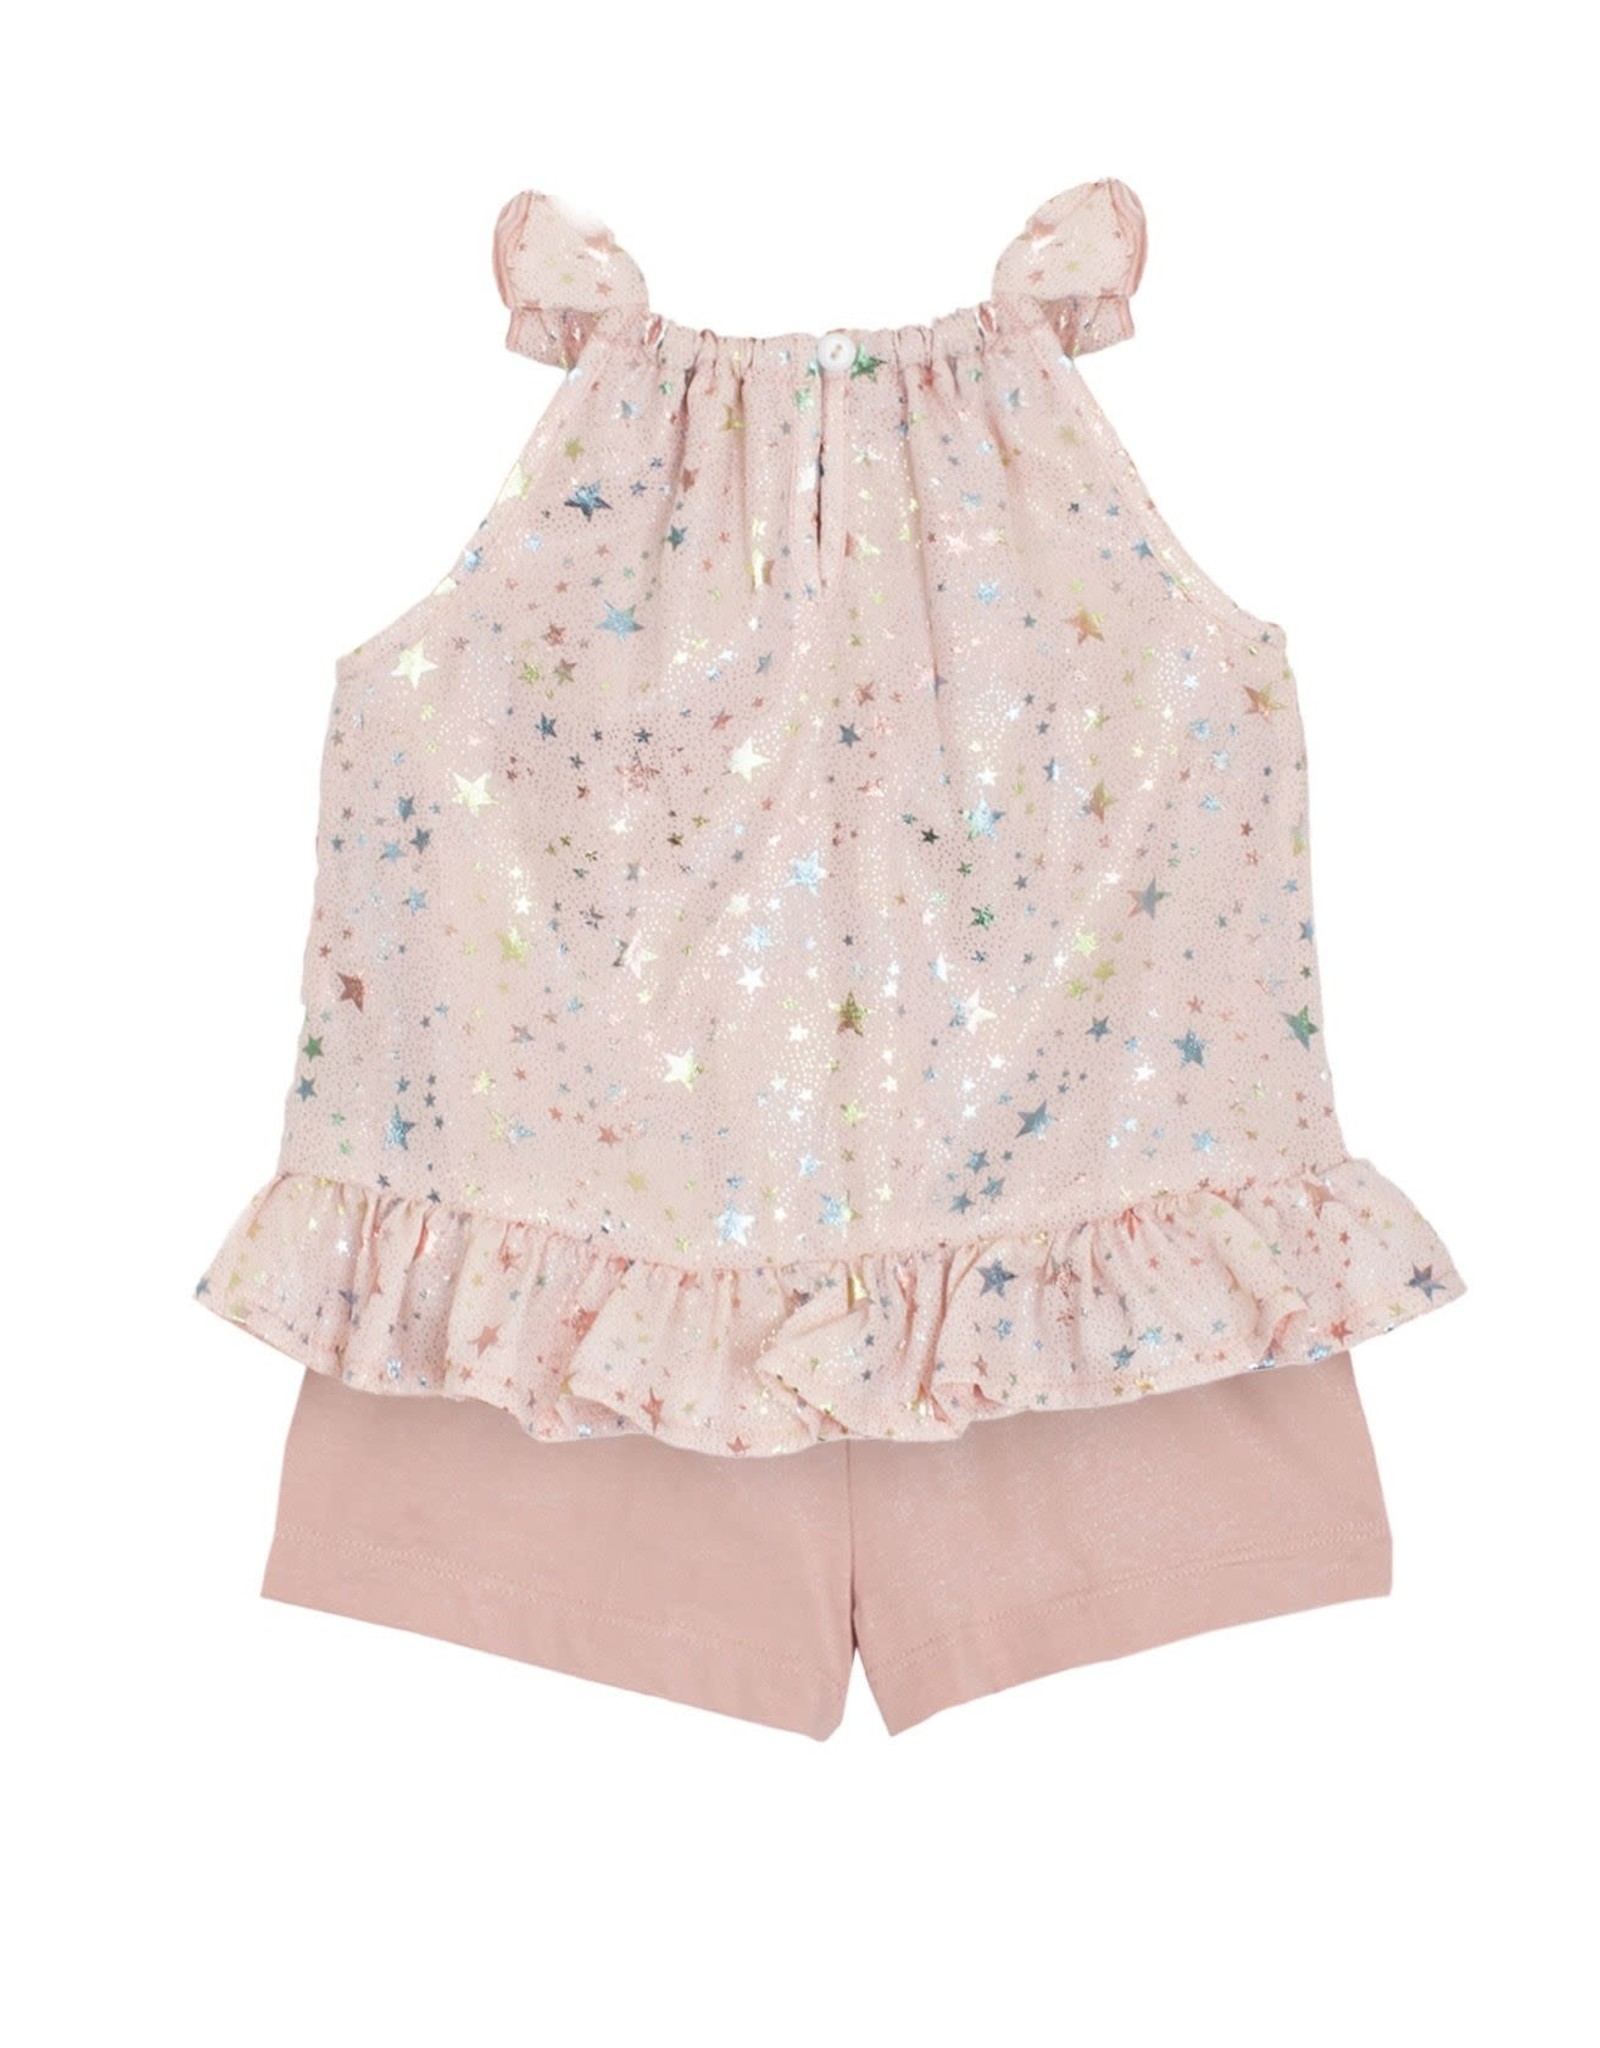 Summer Sparkle Chiffon Top and Knit Short 2PC Set